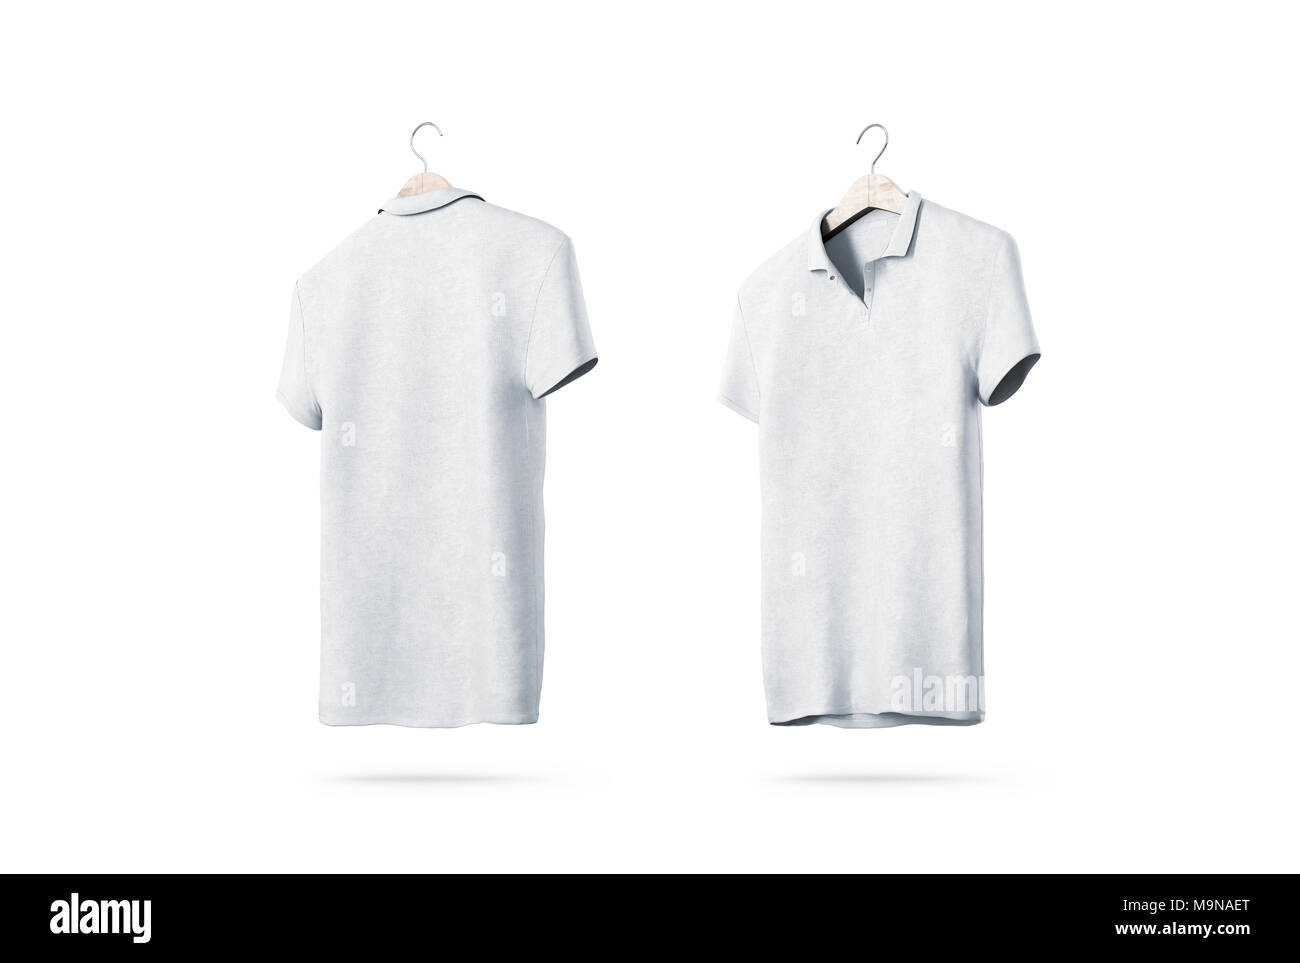 Blank white polo shirt with hanger mockup isolated, front and back side view, 3d rendering. Empty t-shirt uniform mock up. Plain clothing design templ Stock Photo